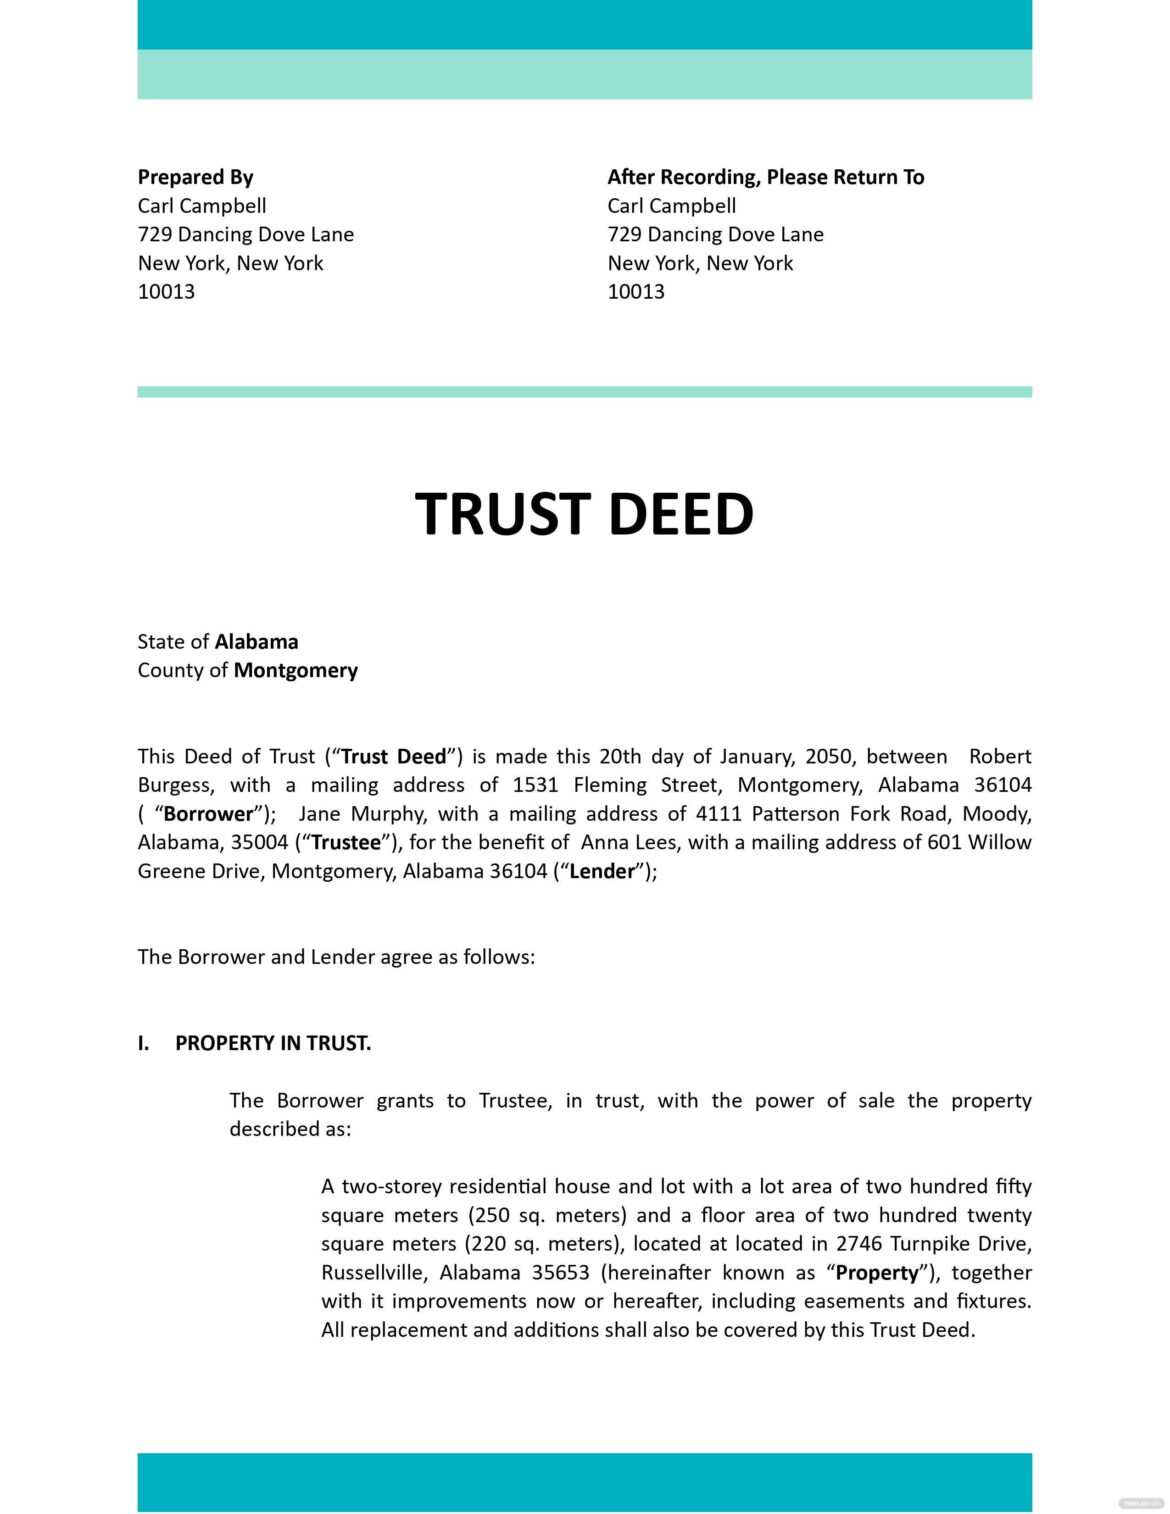 What Is a Trust Deed?